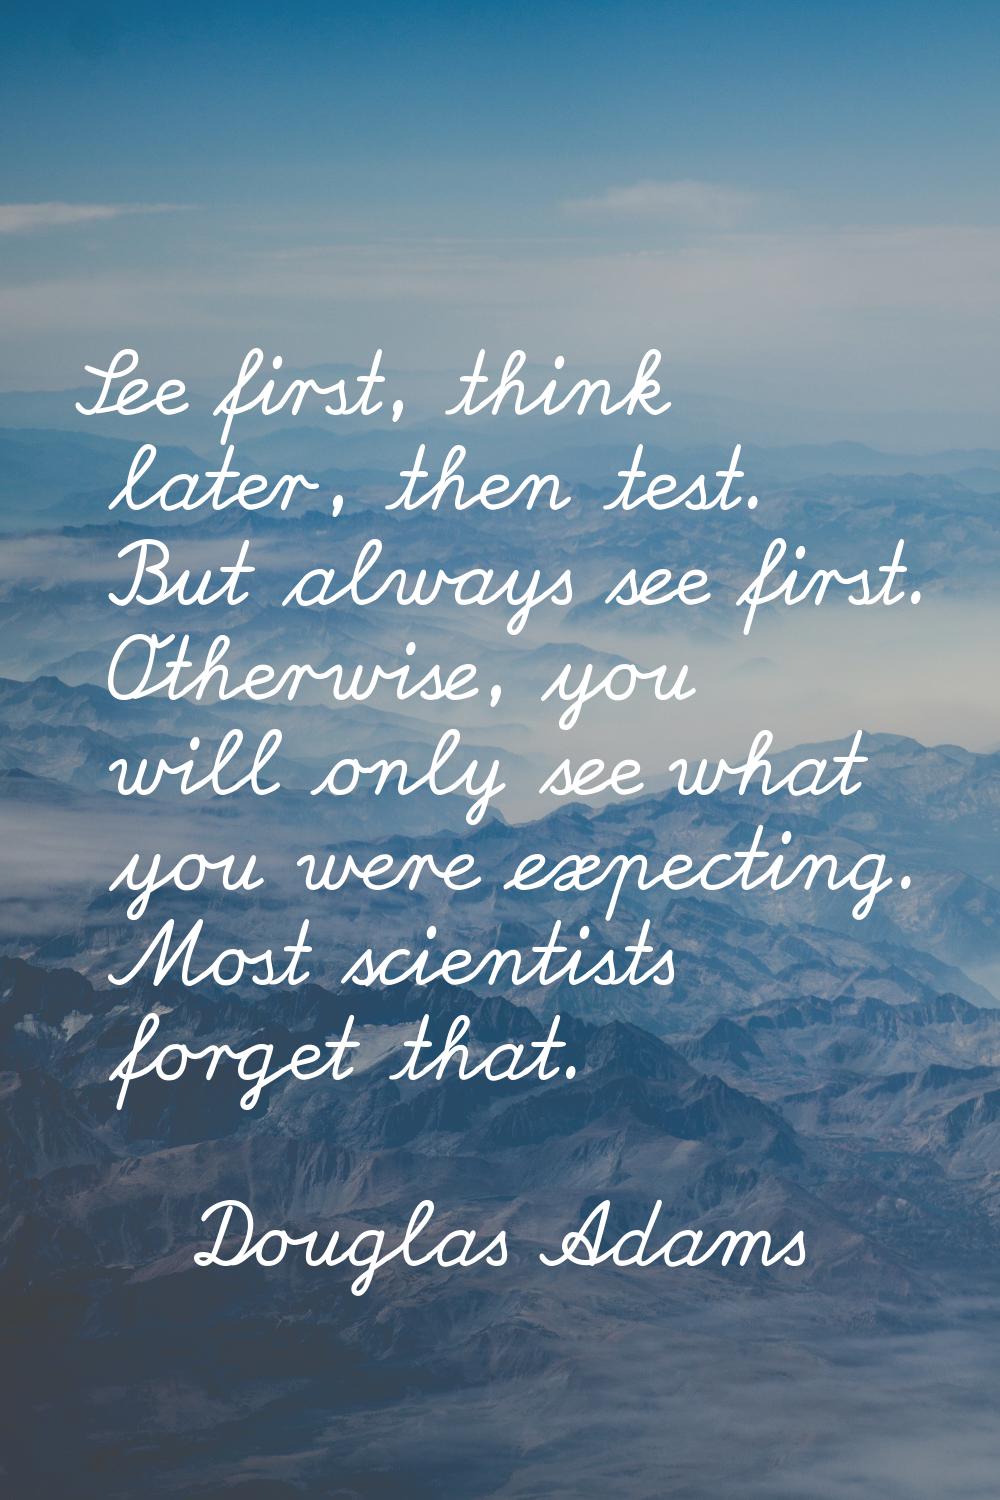 See first, think later, then test. But always see first. Otherwise, you will only see what you were